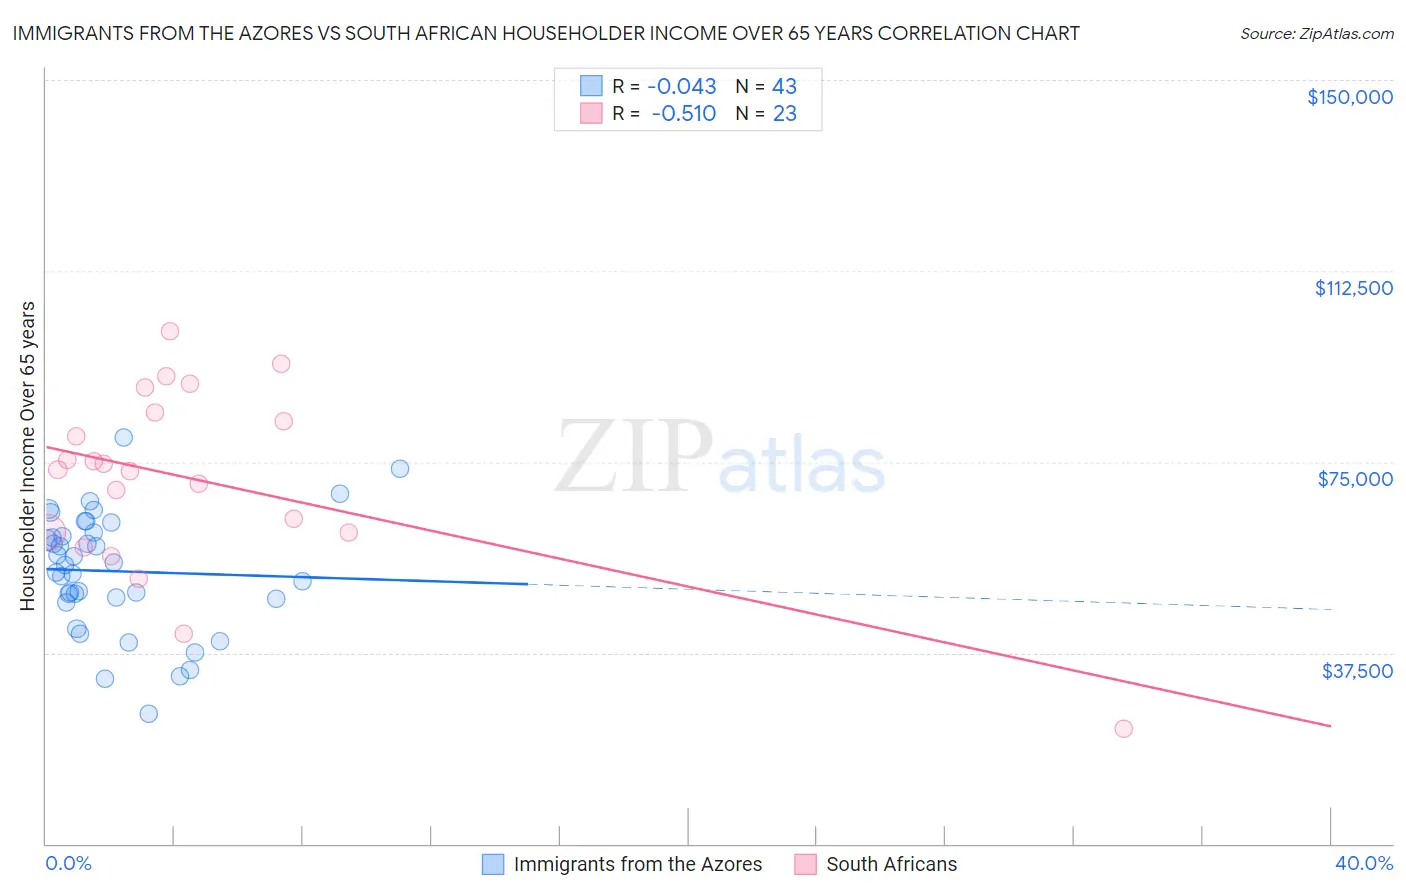 Immigrants from the Azores vs South African Householder Income Over 65 years